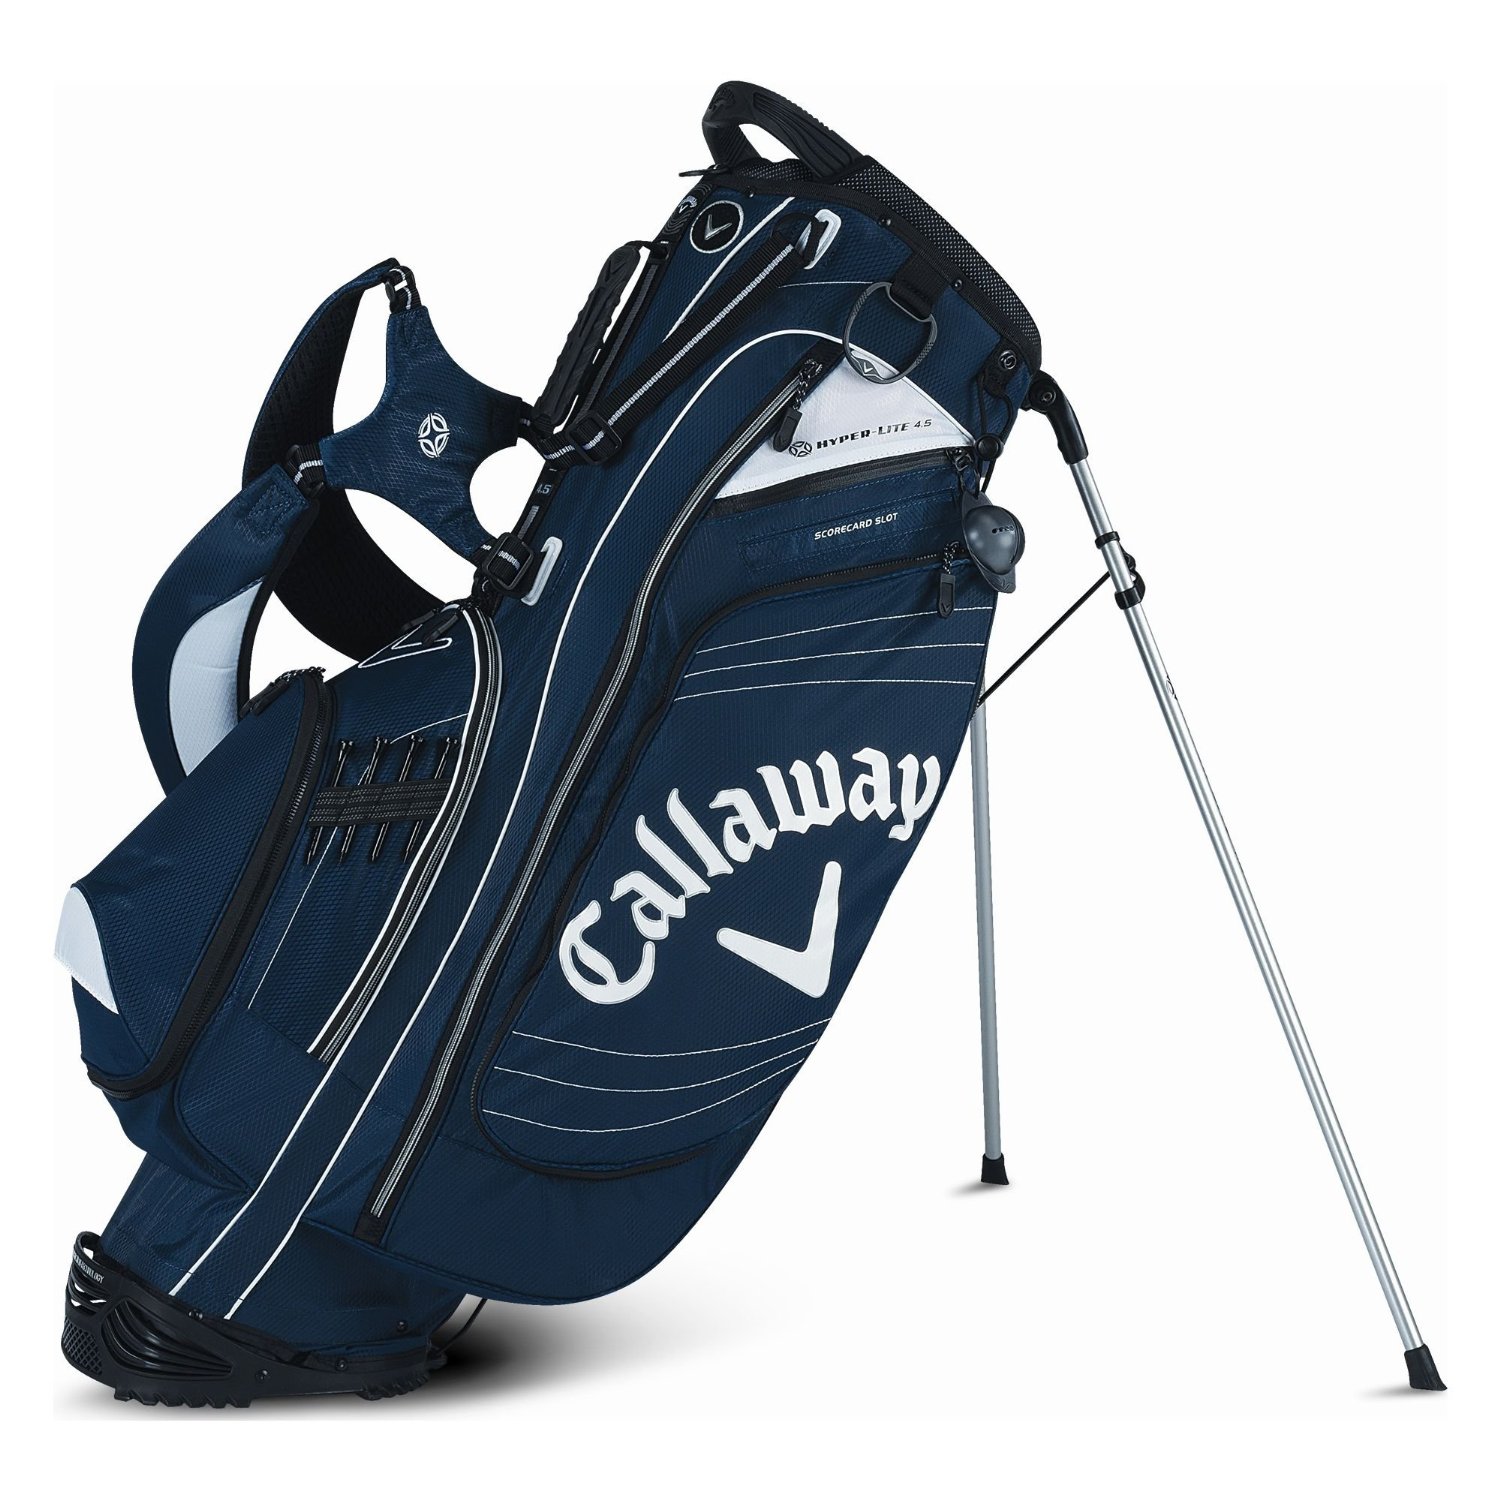 Buy Sun Mountain Mens Golf Bags for Best Prices Online!